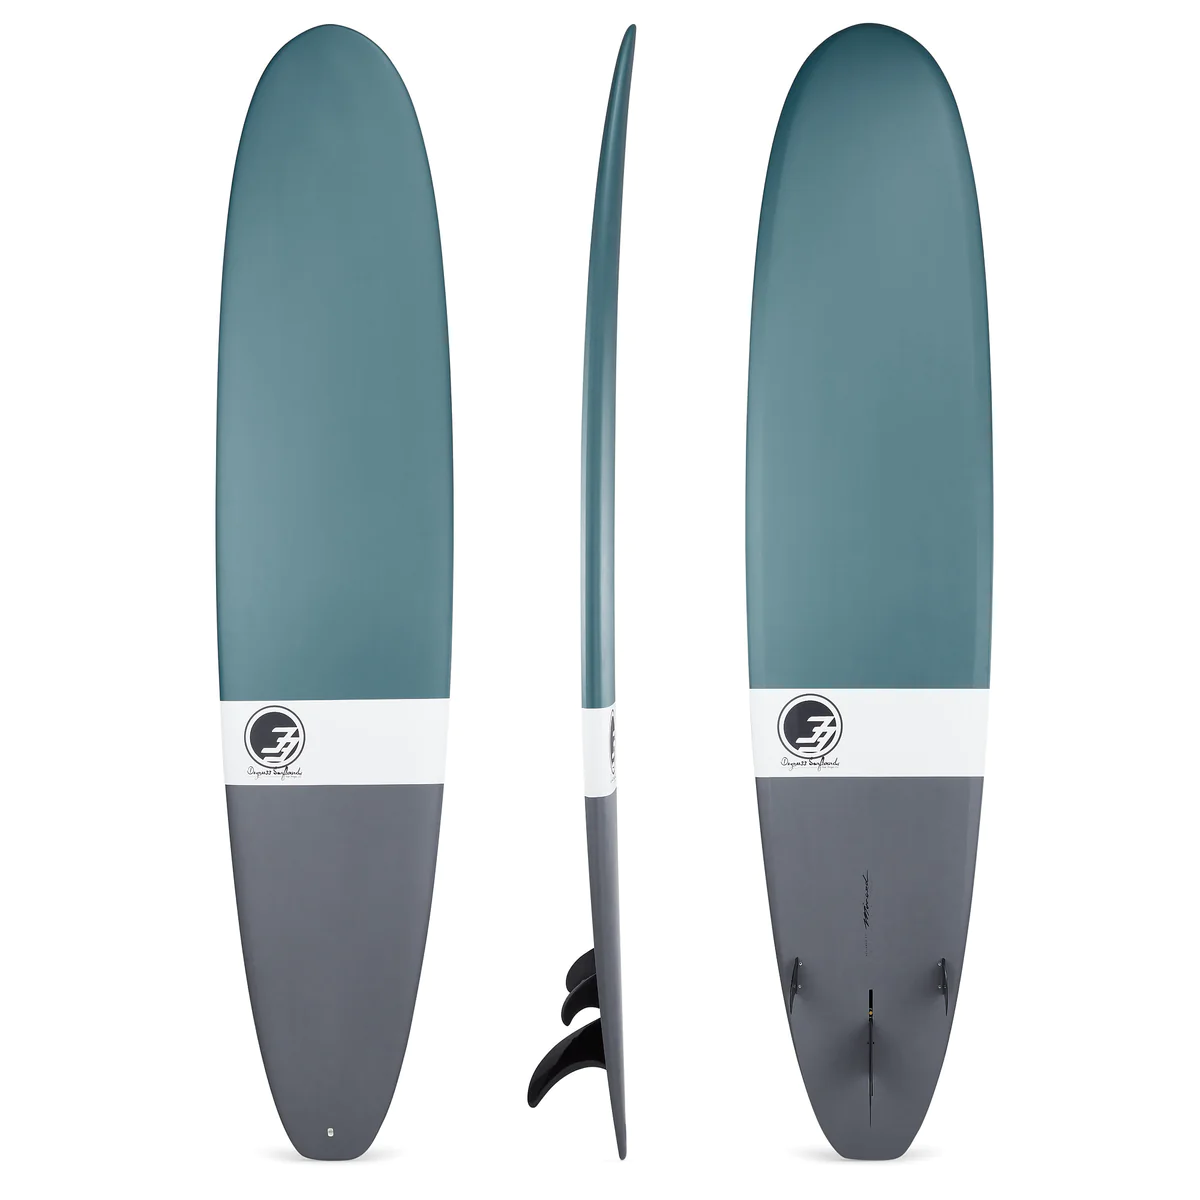 degree33 ultimate longboard for our list of the best beginner surfboards